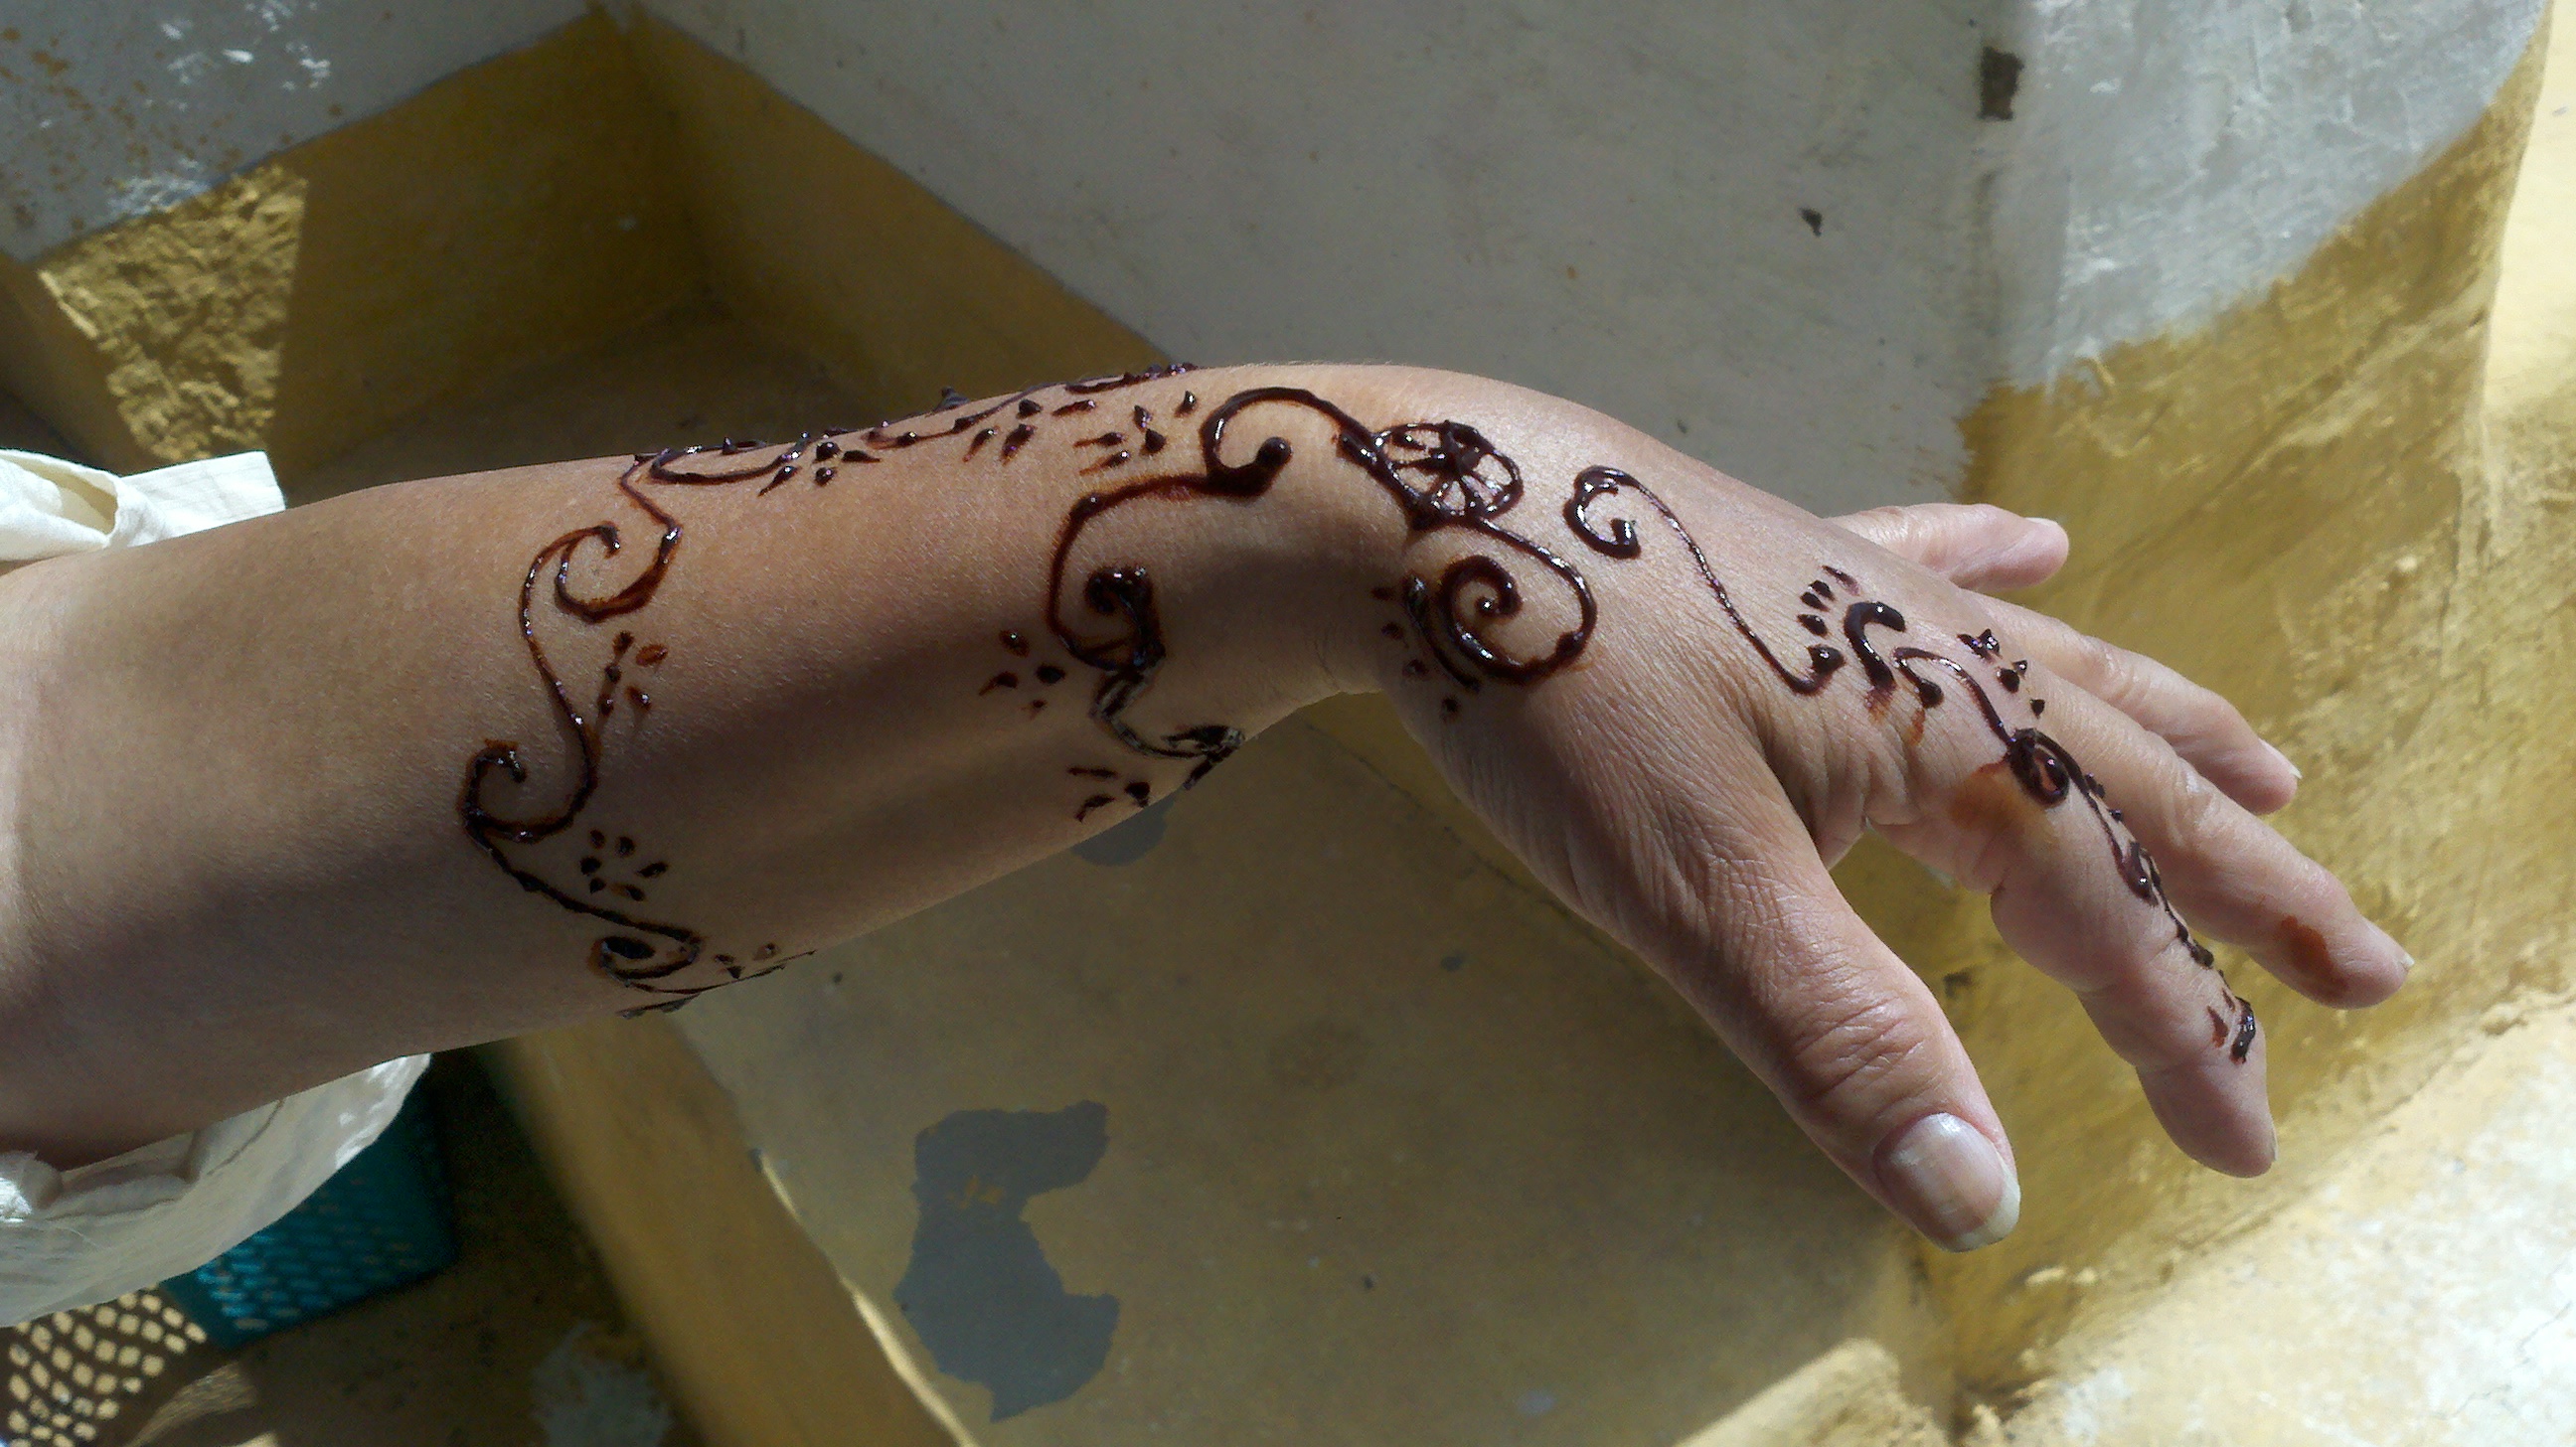 our first henna tattoos: